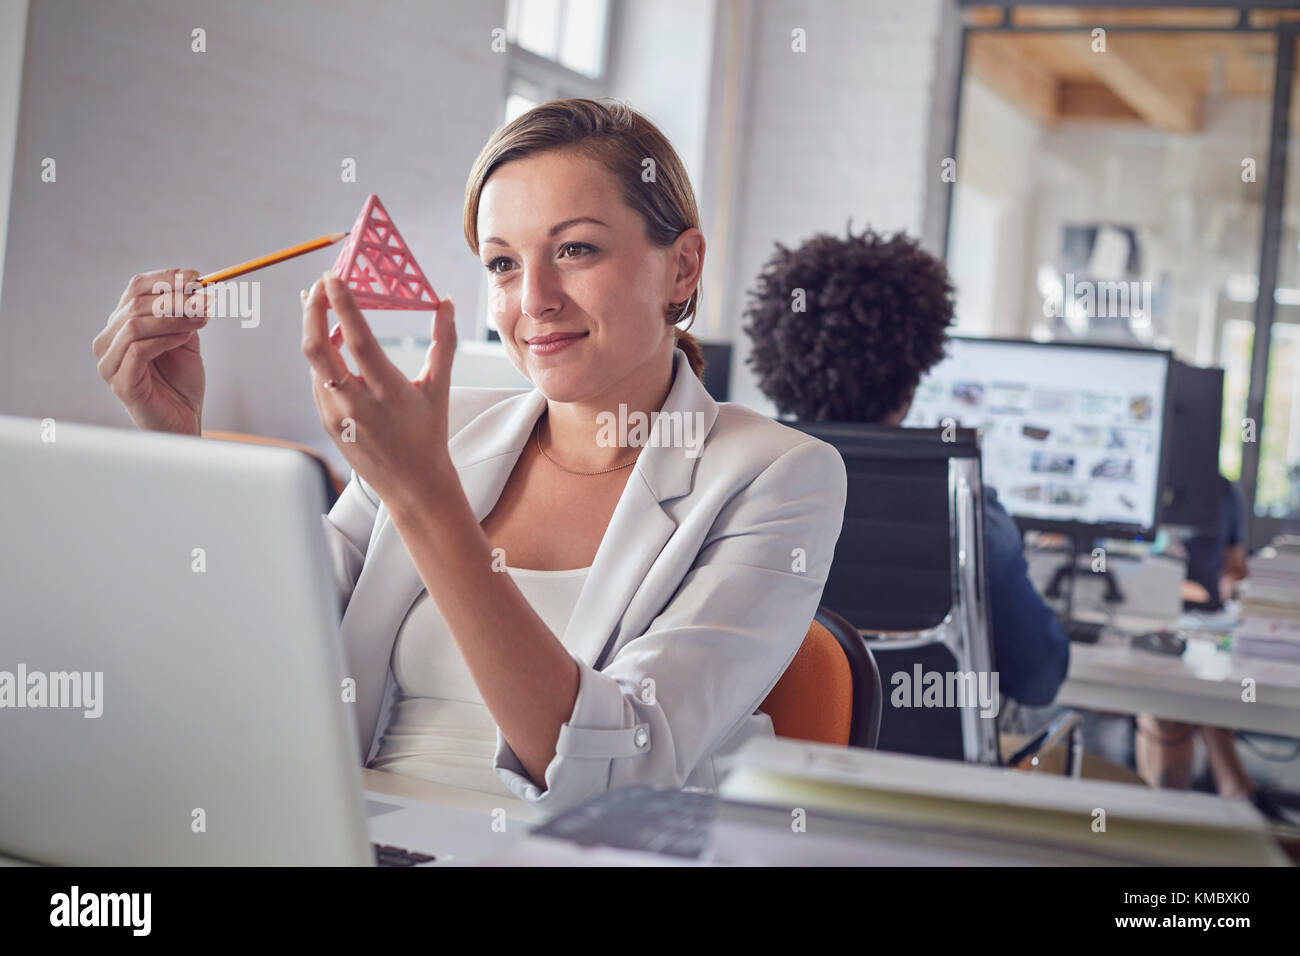 Smiling female design professional examining triangle prototype at laptop in office Stock Photo